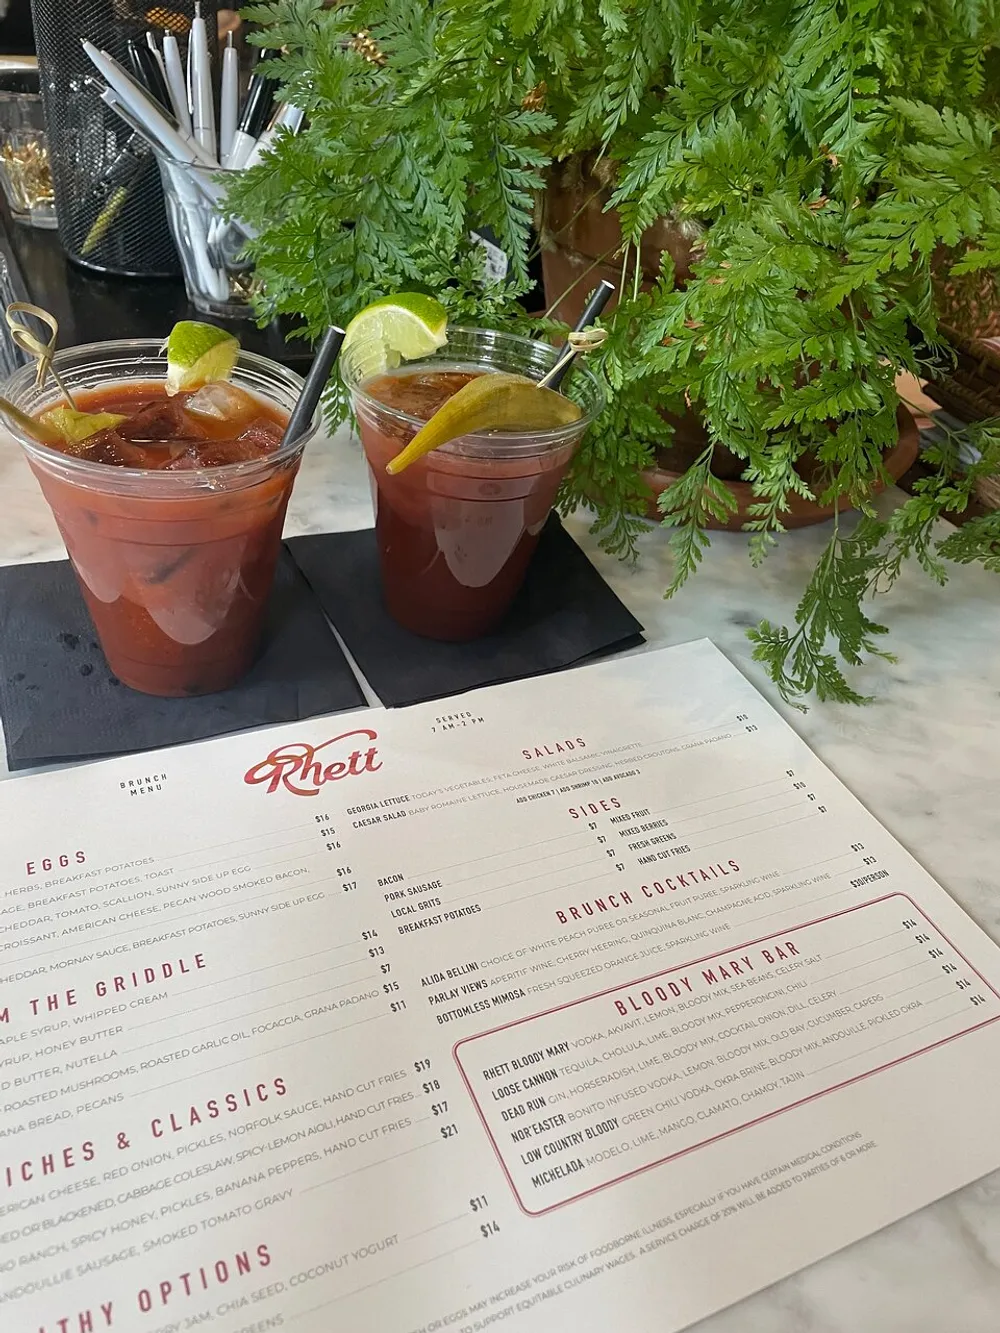 Two Bloody Mary cocktails are placed on a bar beside a brunch menu suggesting a leisurely dining experience